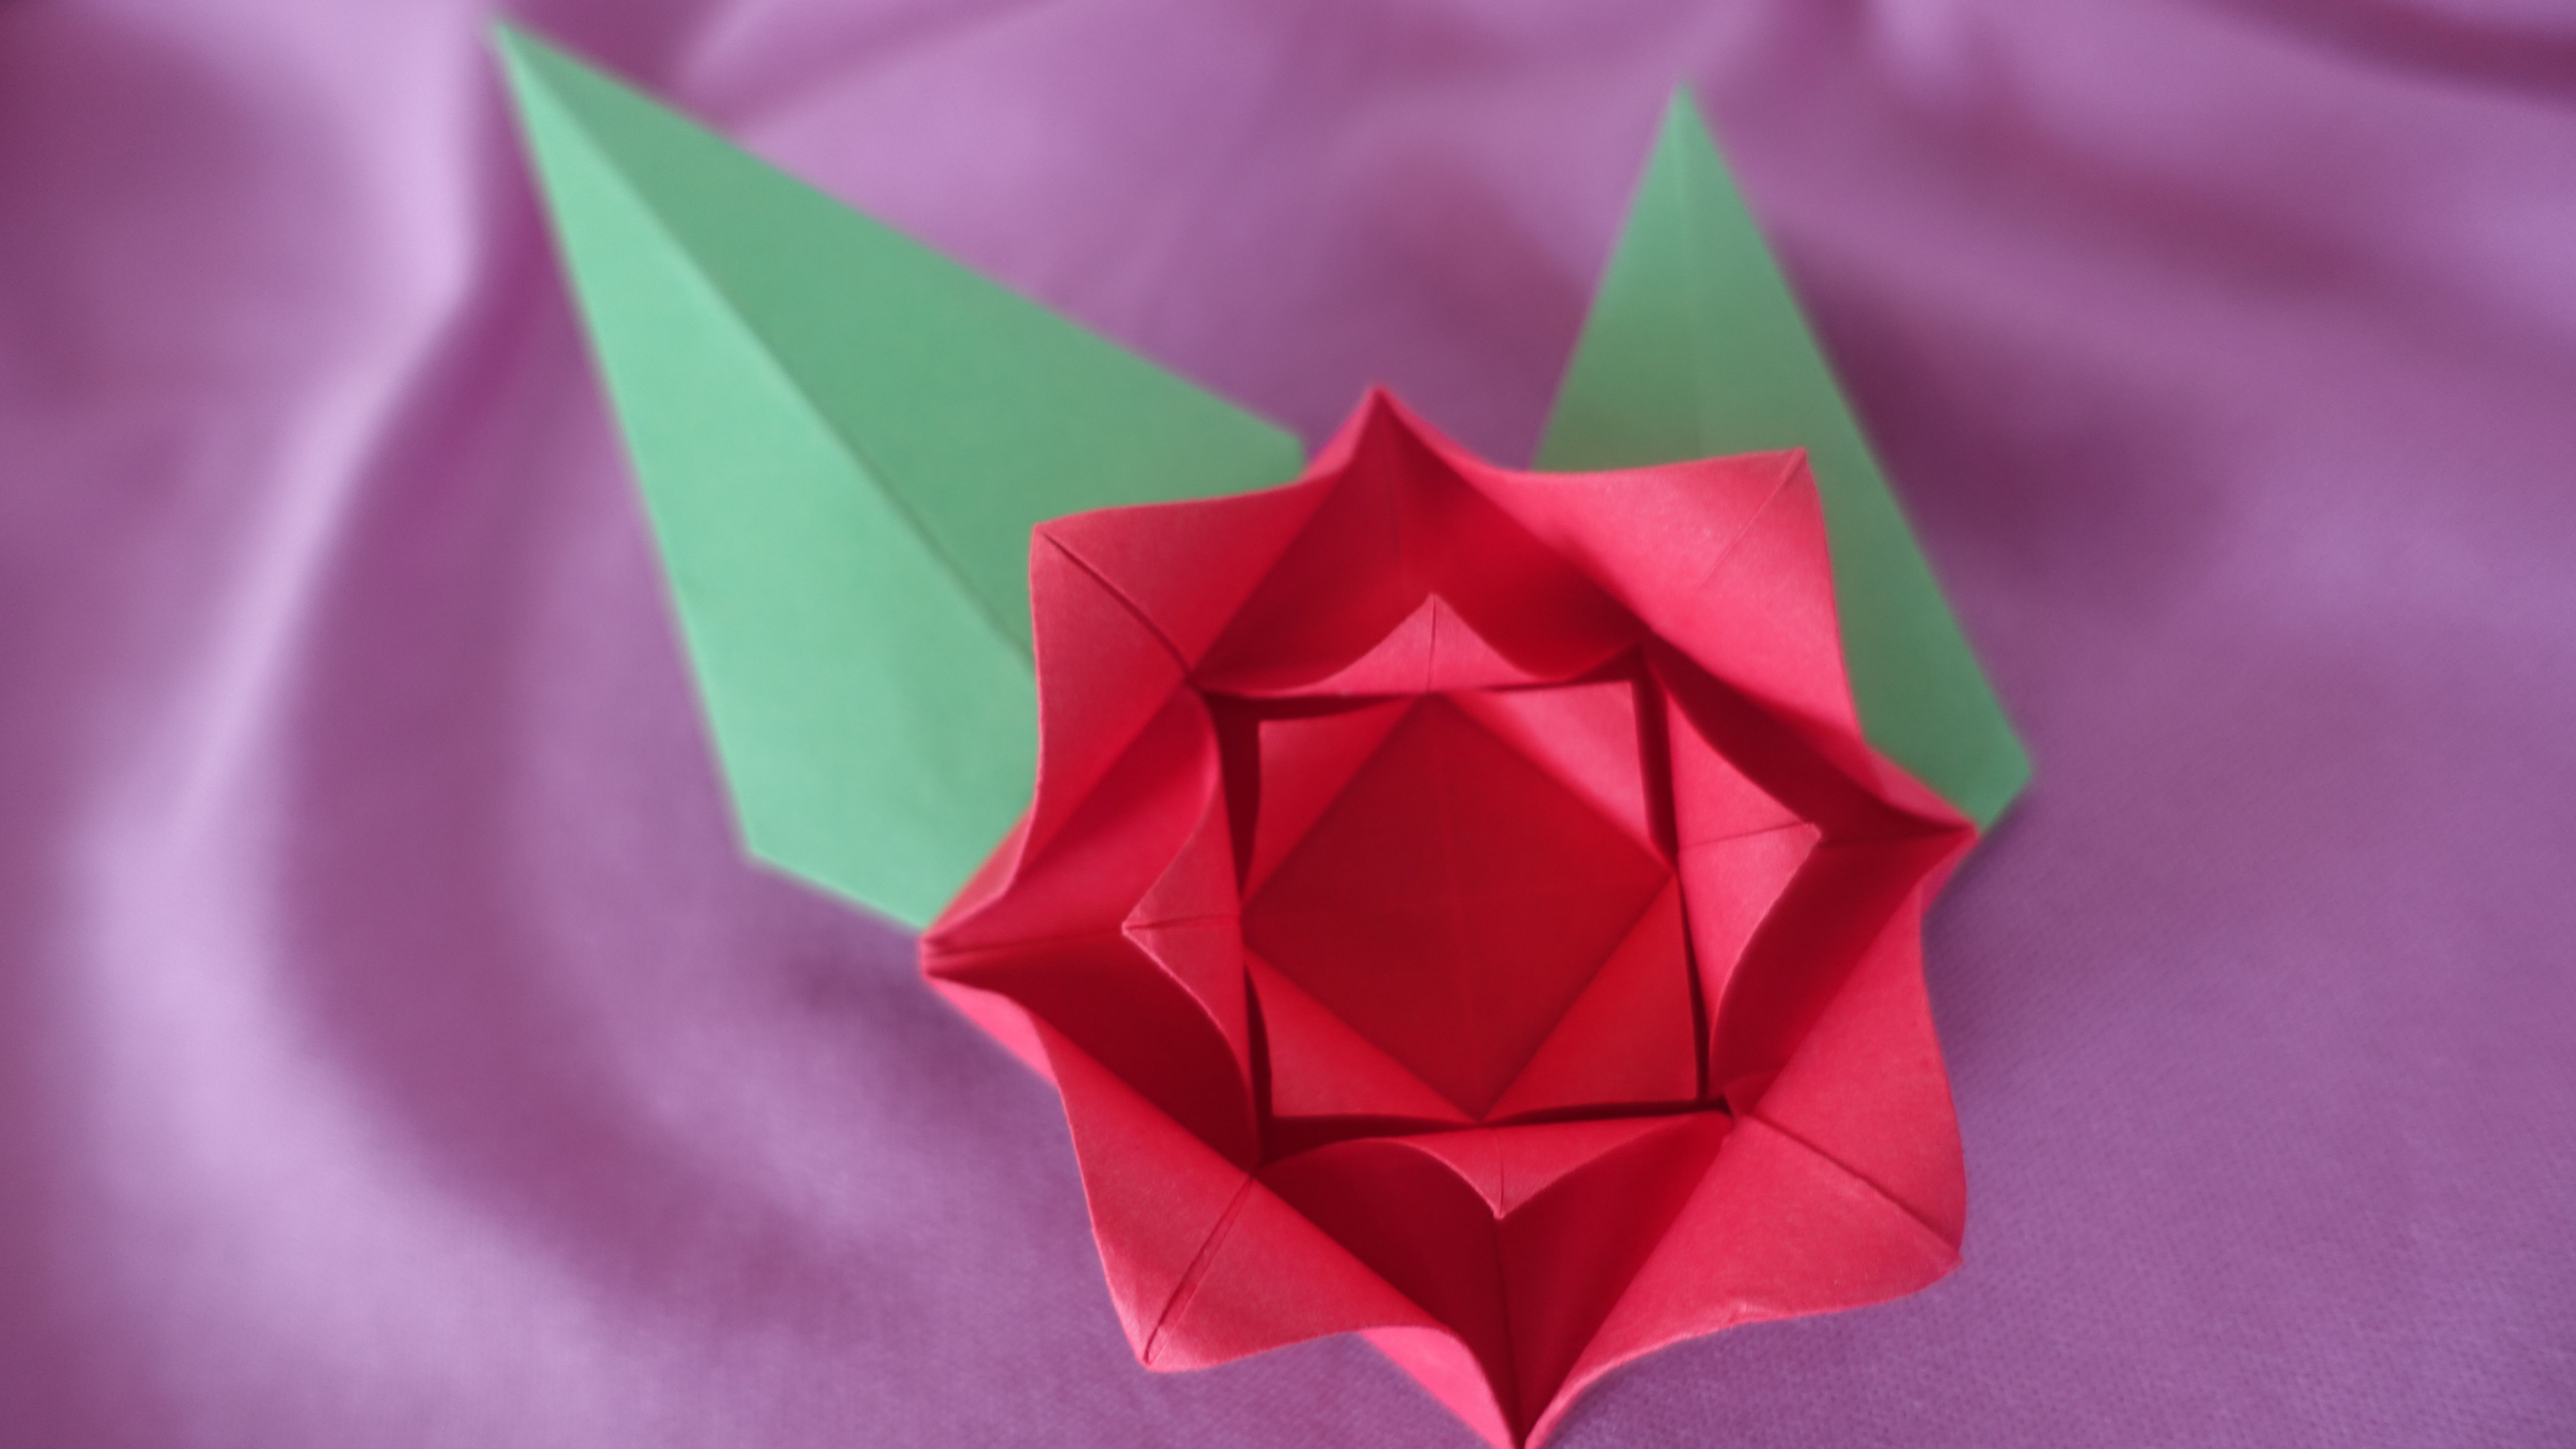 How To Make Small Origami Hearts Make An Easy Origami Rose